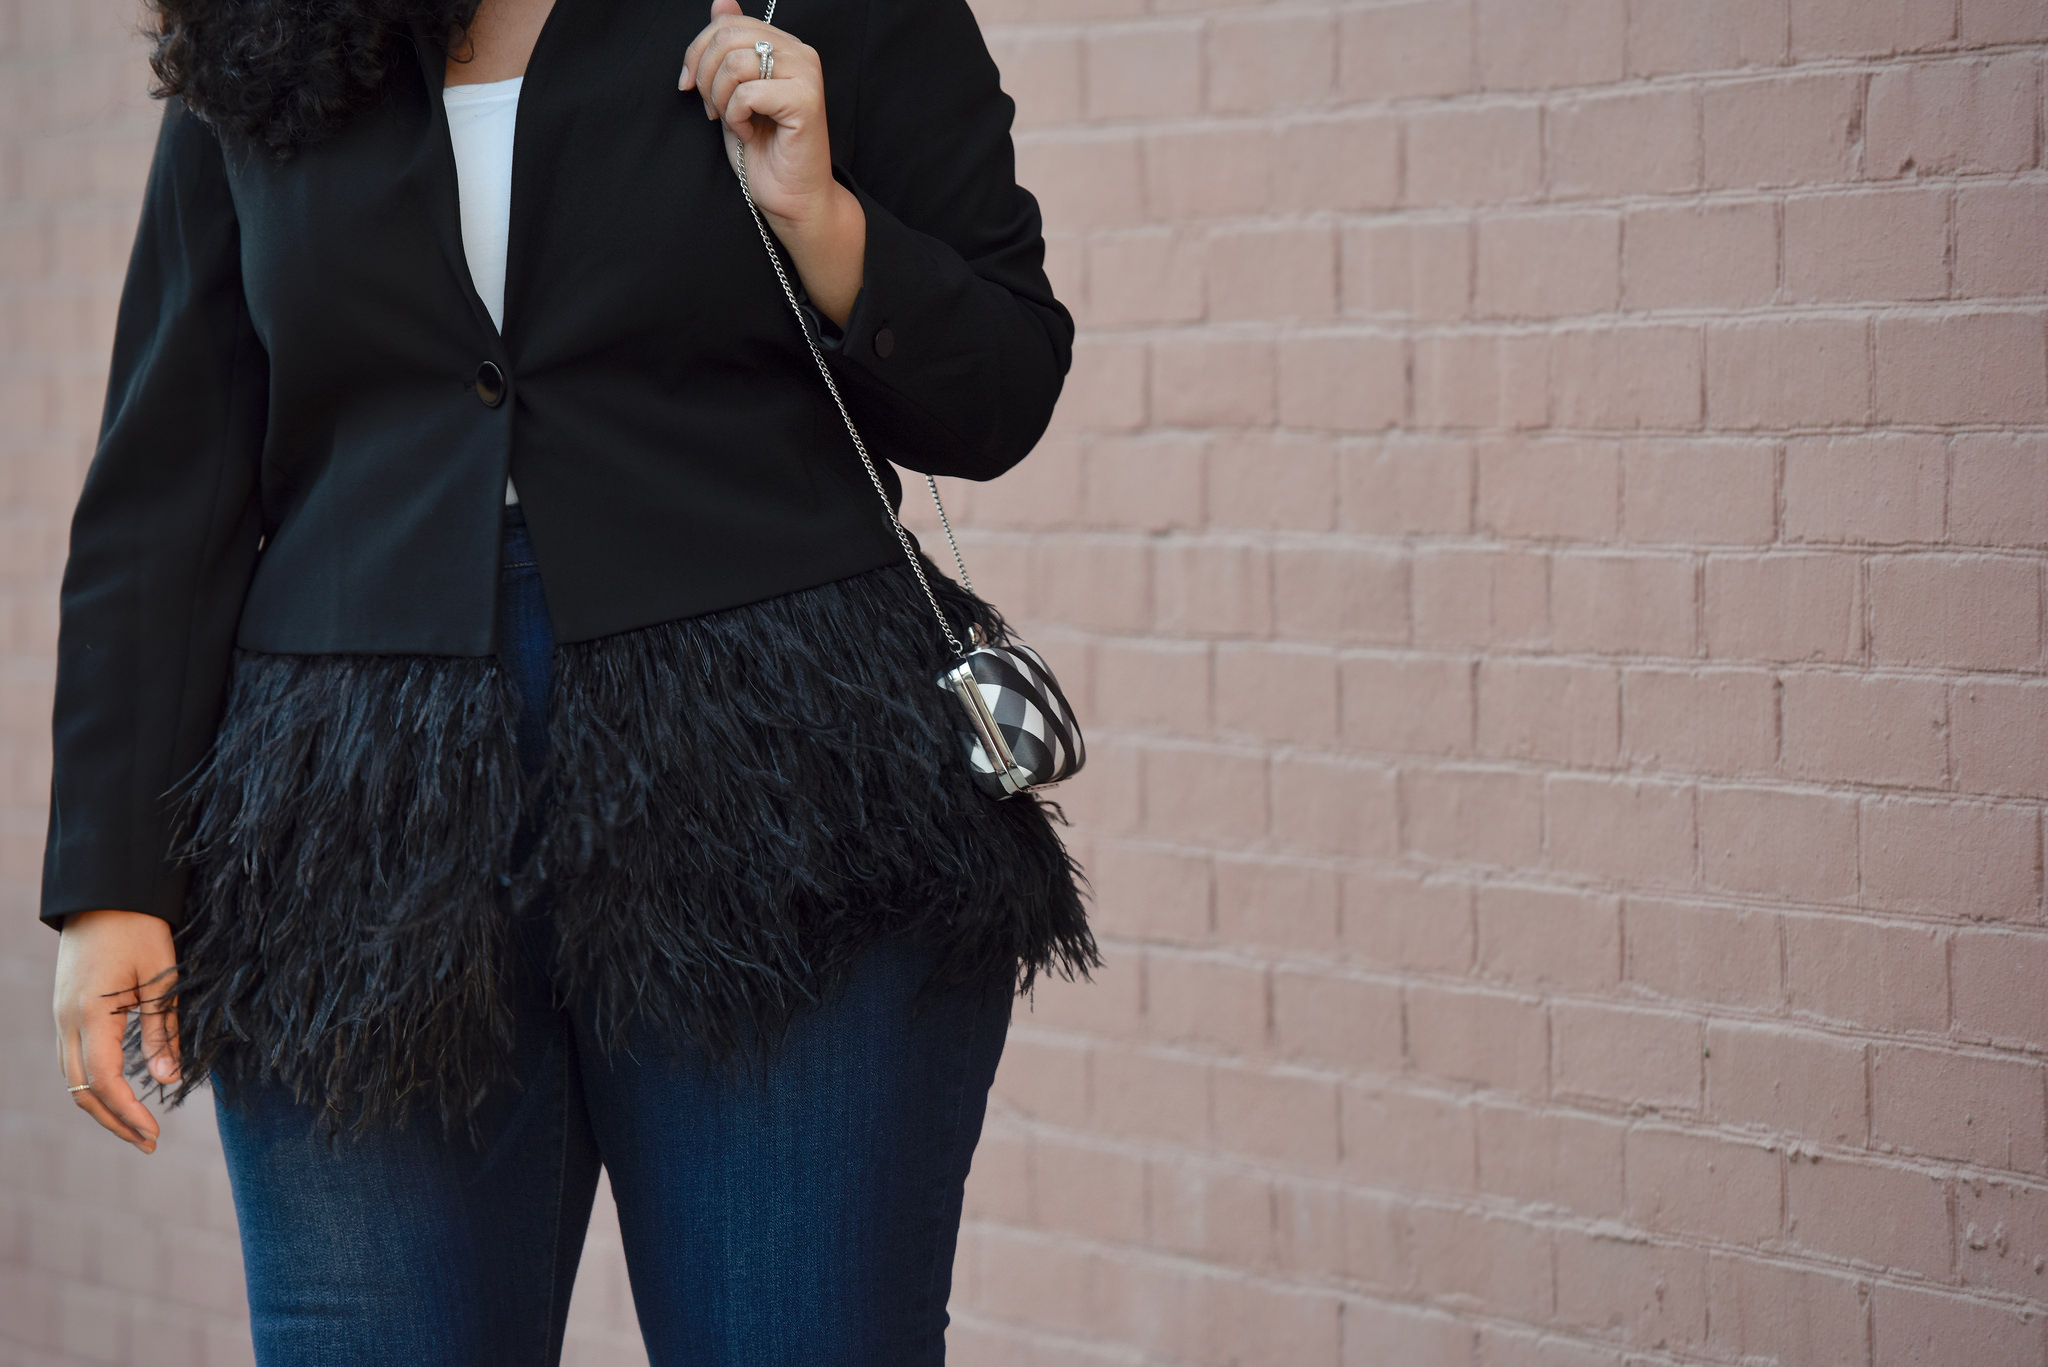 Feather Blazer + High Waist Jeans by Girl With Curves